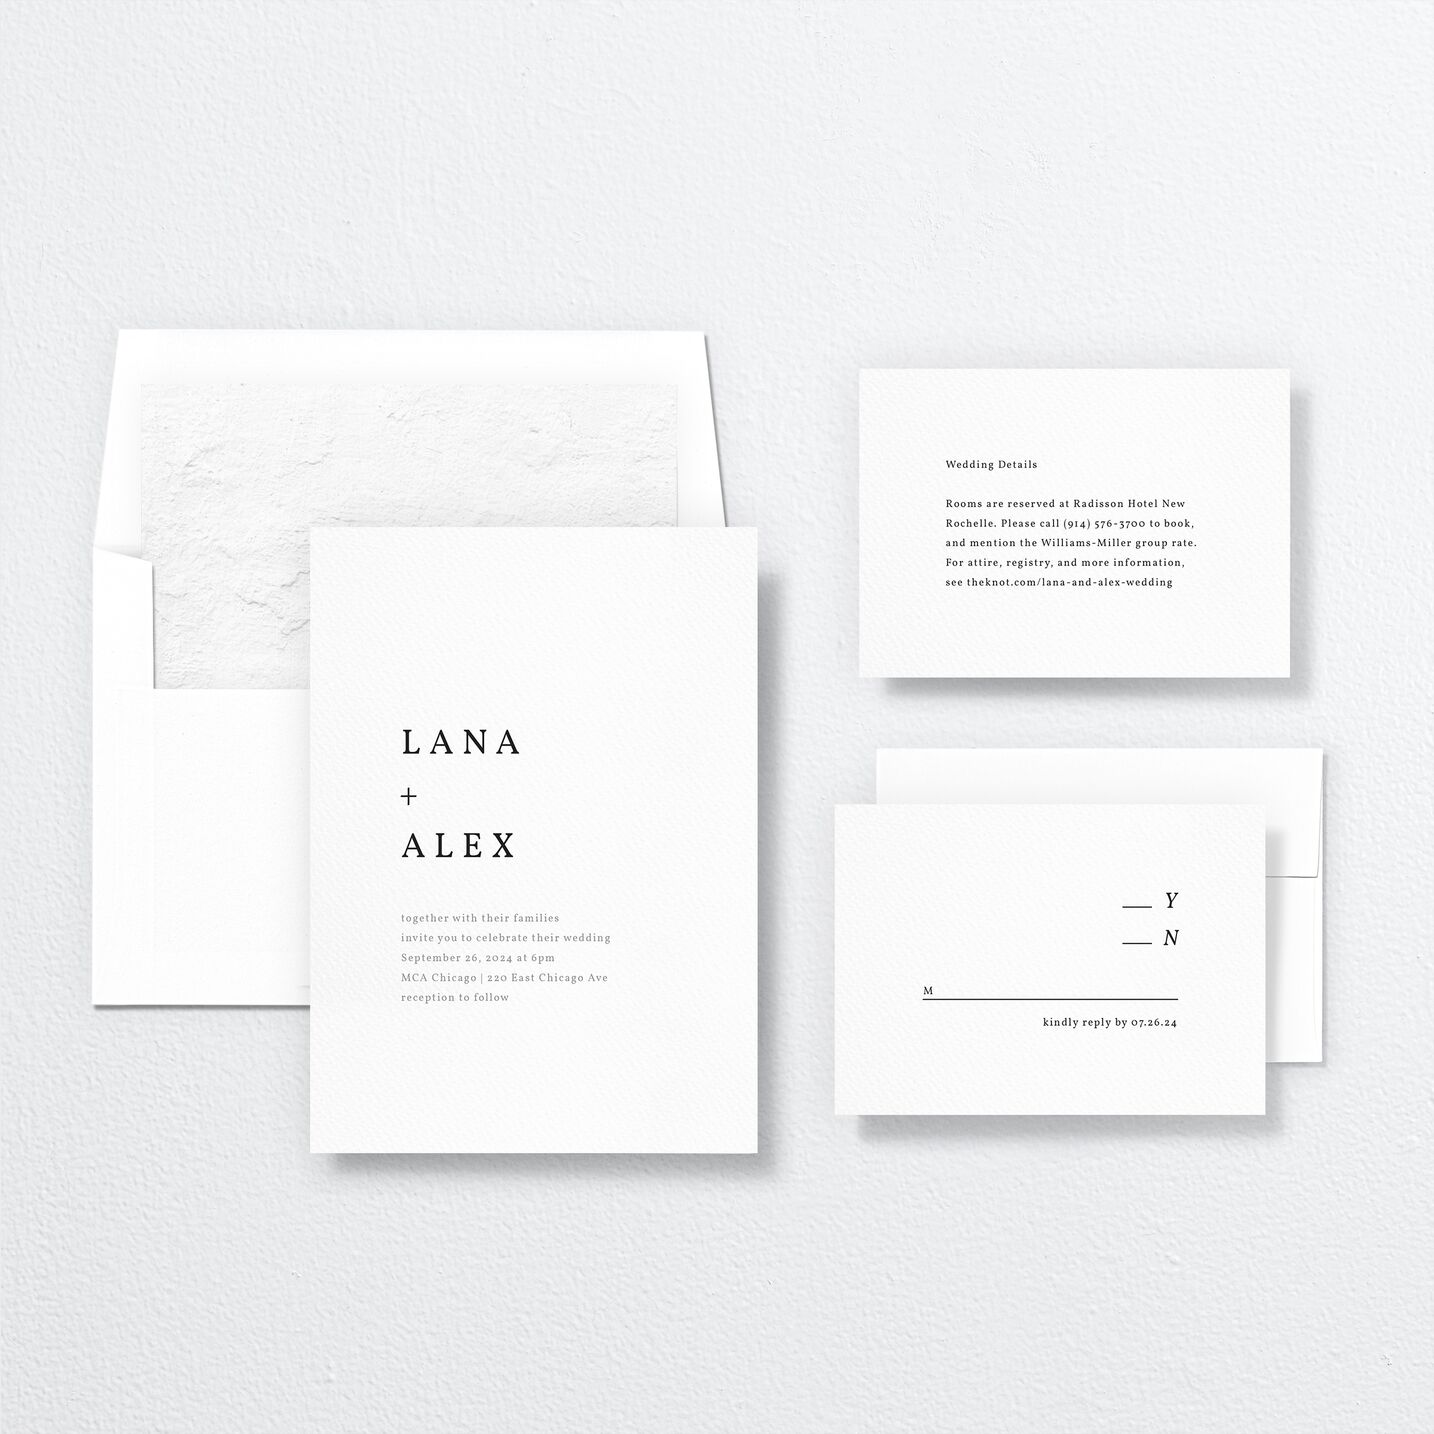 Natural Palette Wedding Invitations suite in white